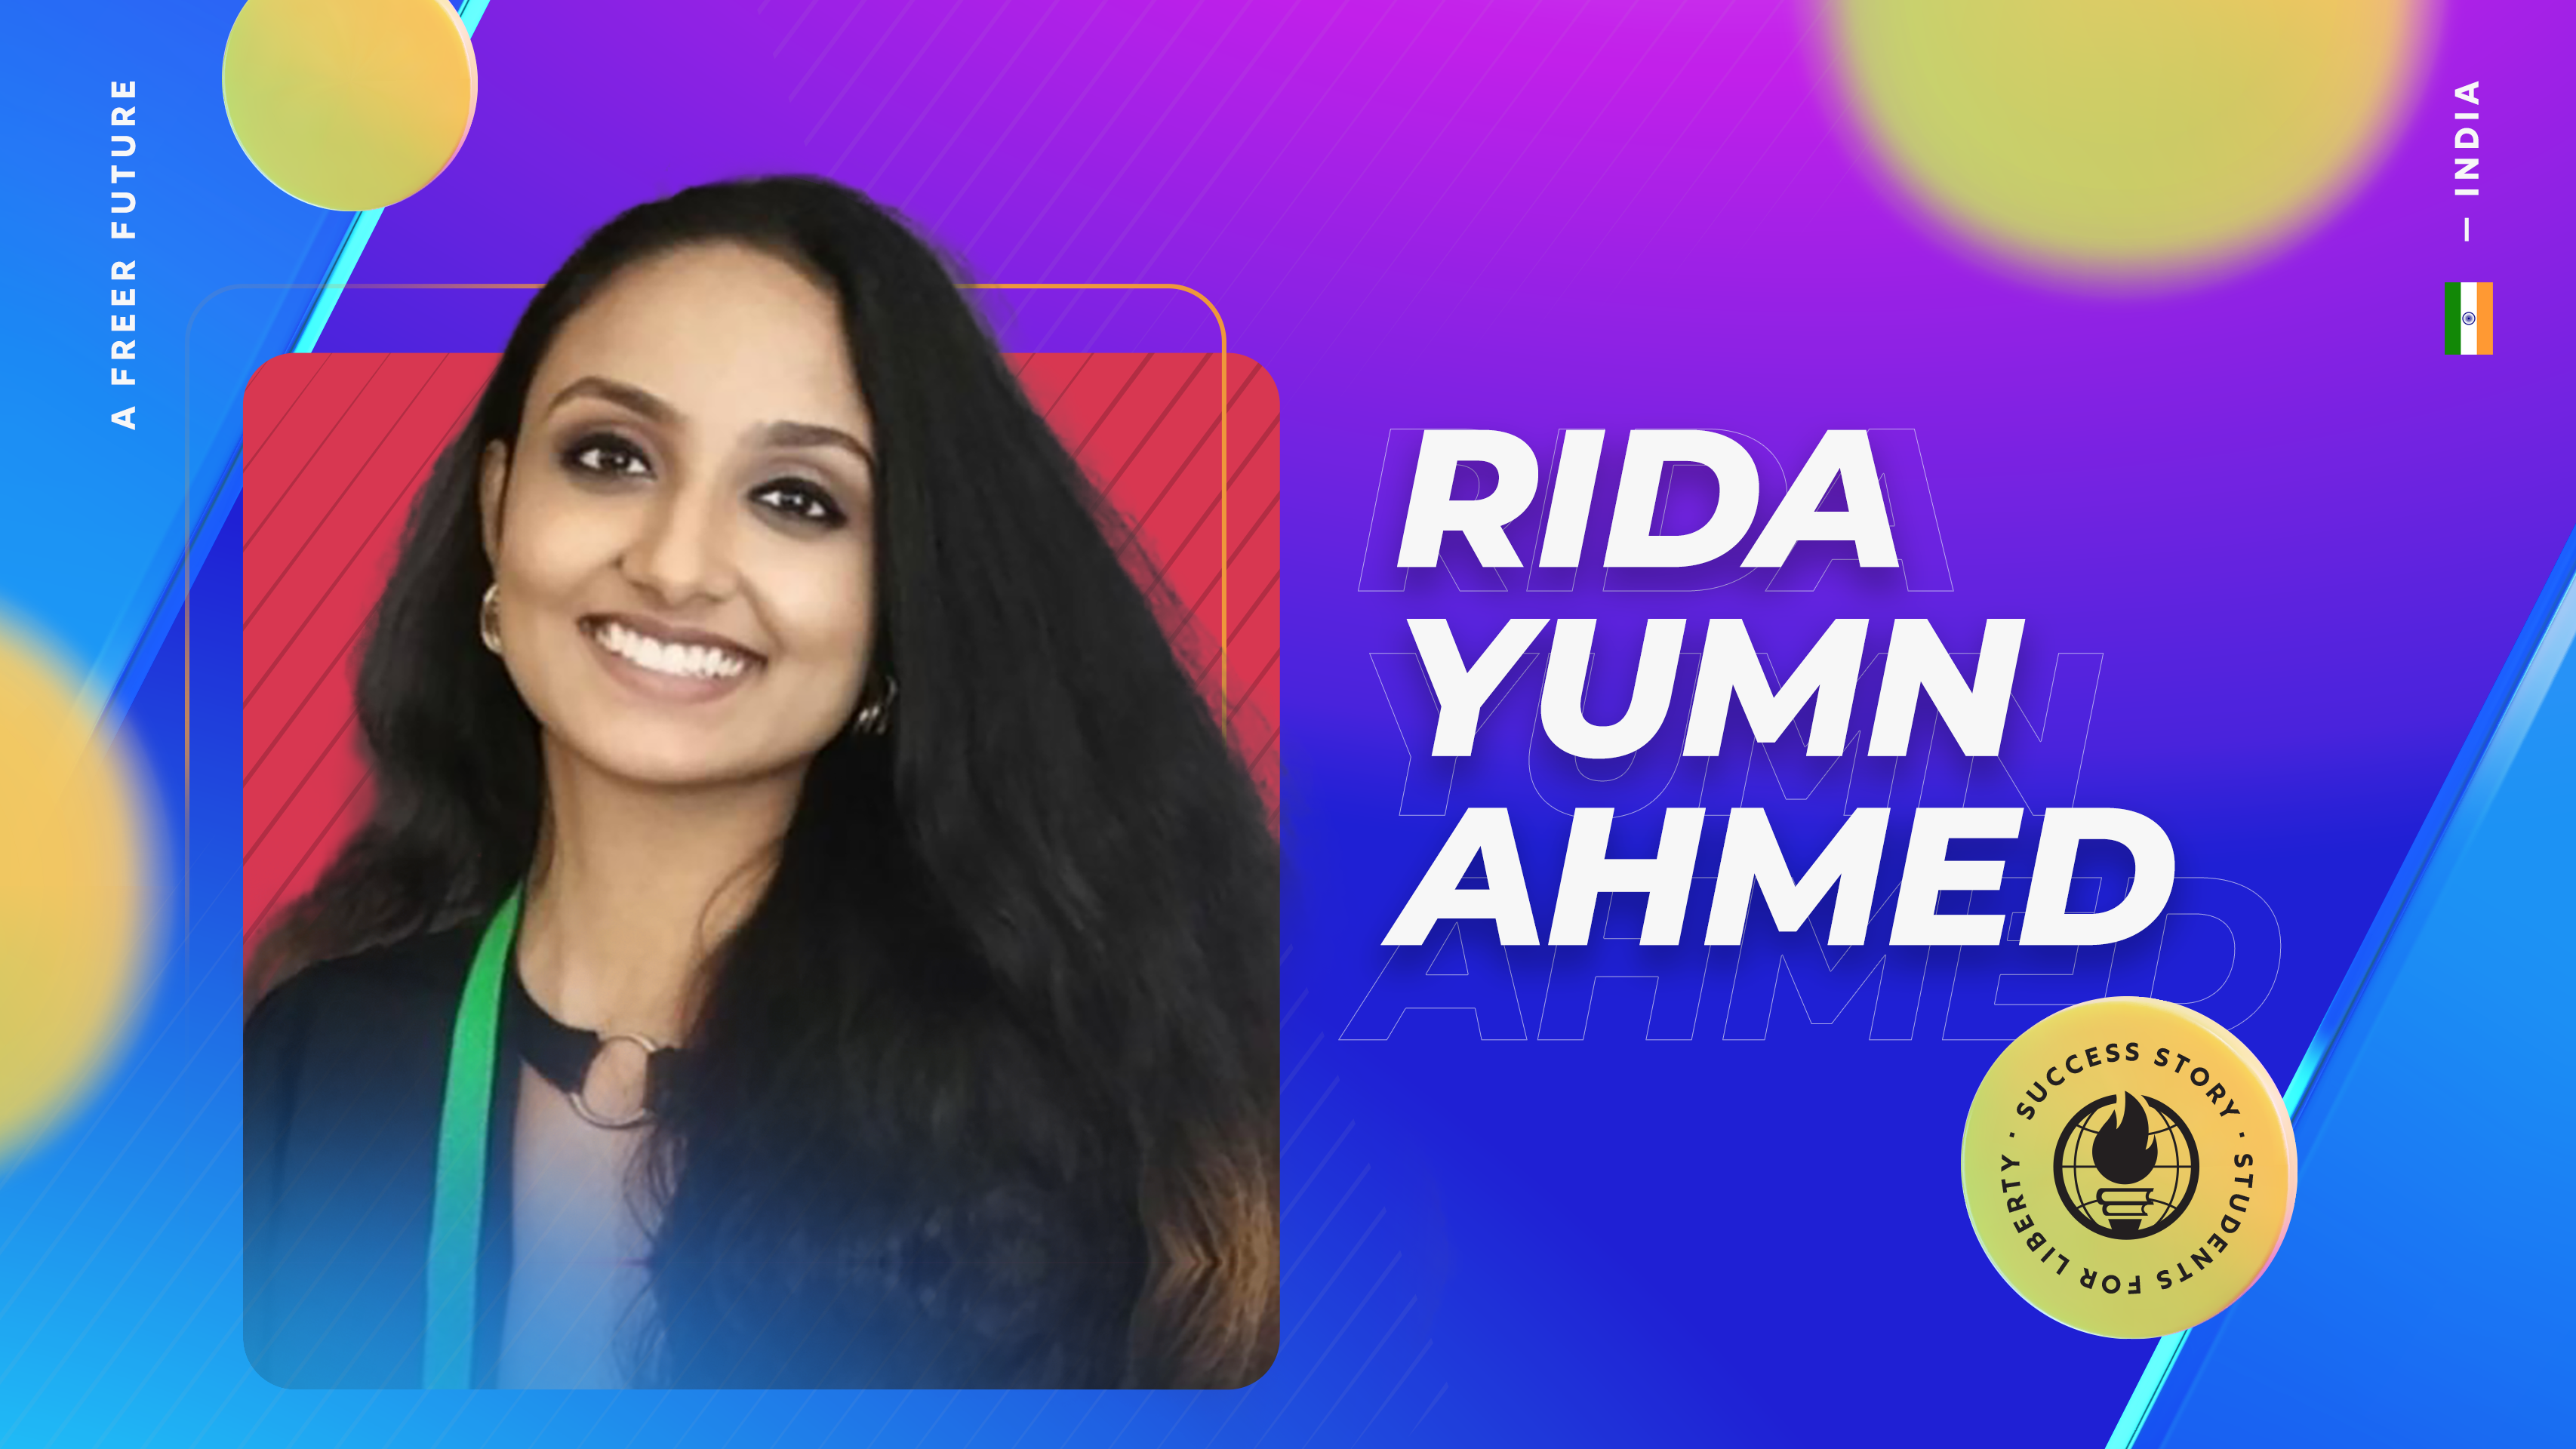 Meet Rida Yumn Ahmed, a young and ambitious advocate of liberty who has already made a significant impact in the cause of promoting freedom.